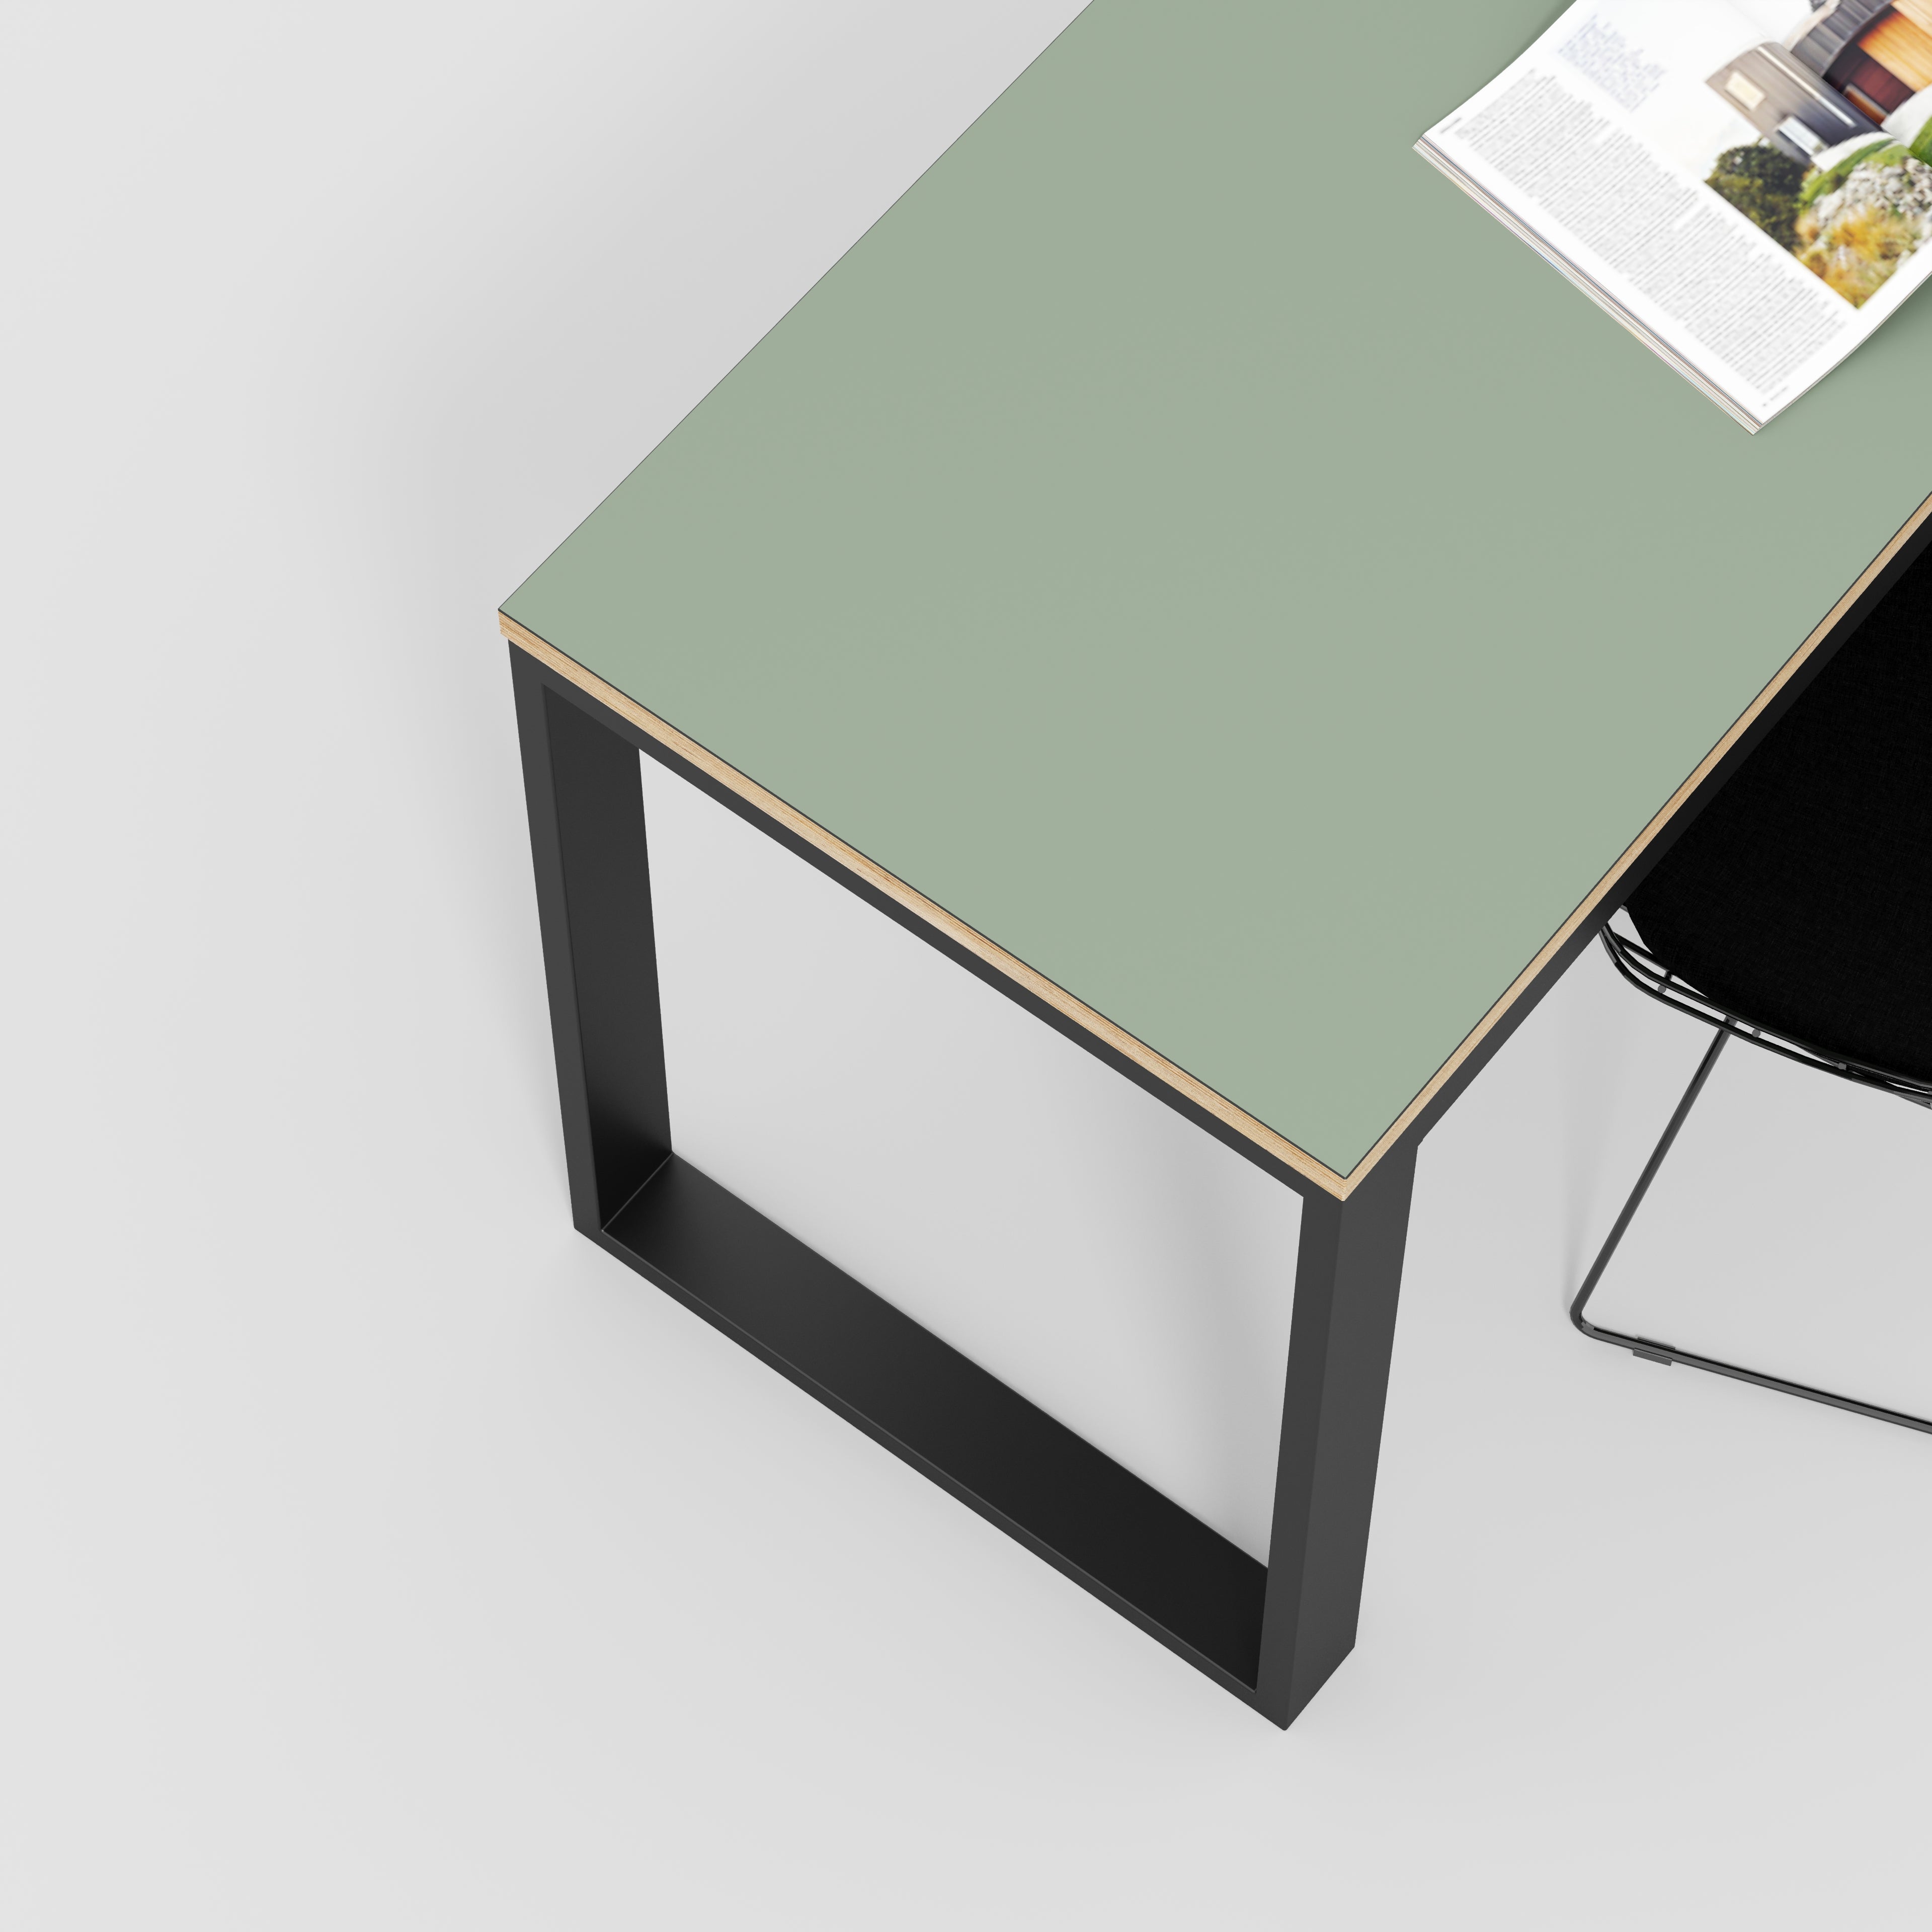 Desk with Black Industrial Frame - Formica Green Slate - 1800(w) x 585(d) x 735(h)